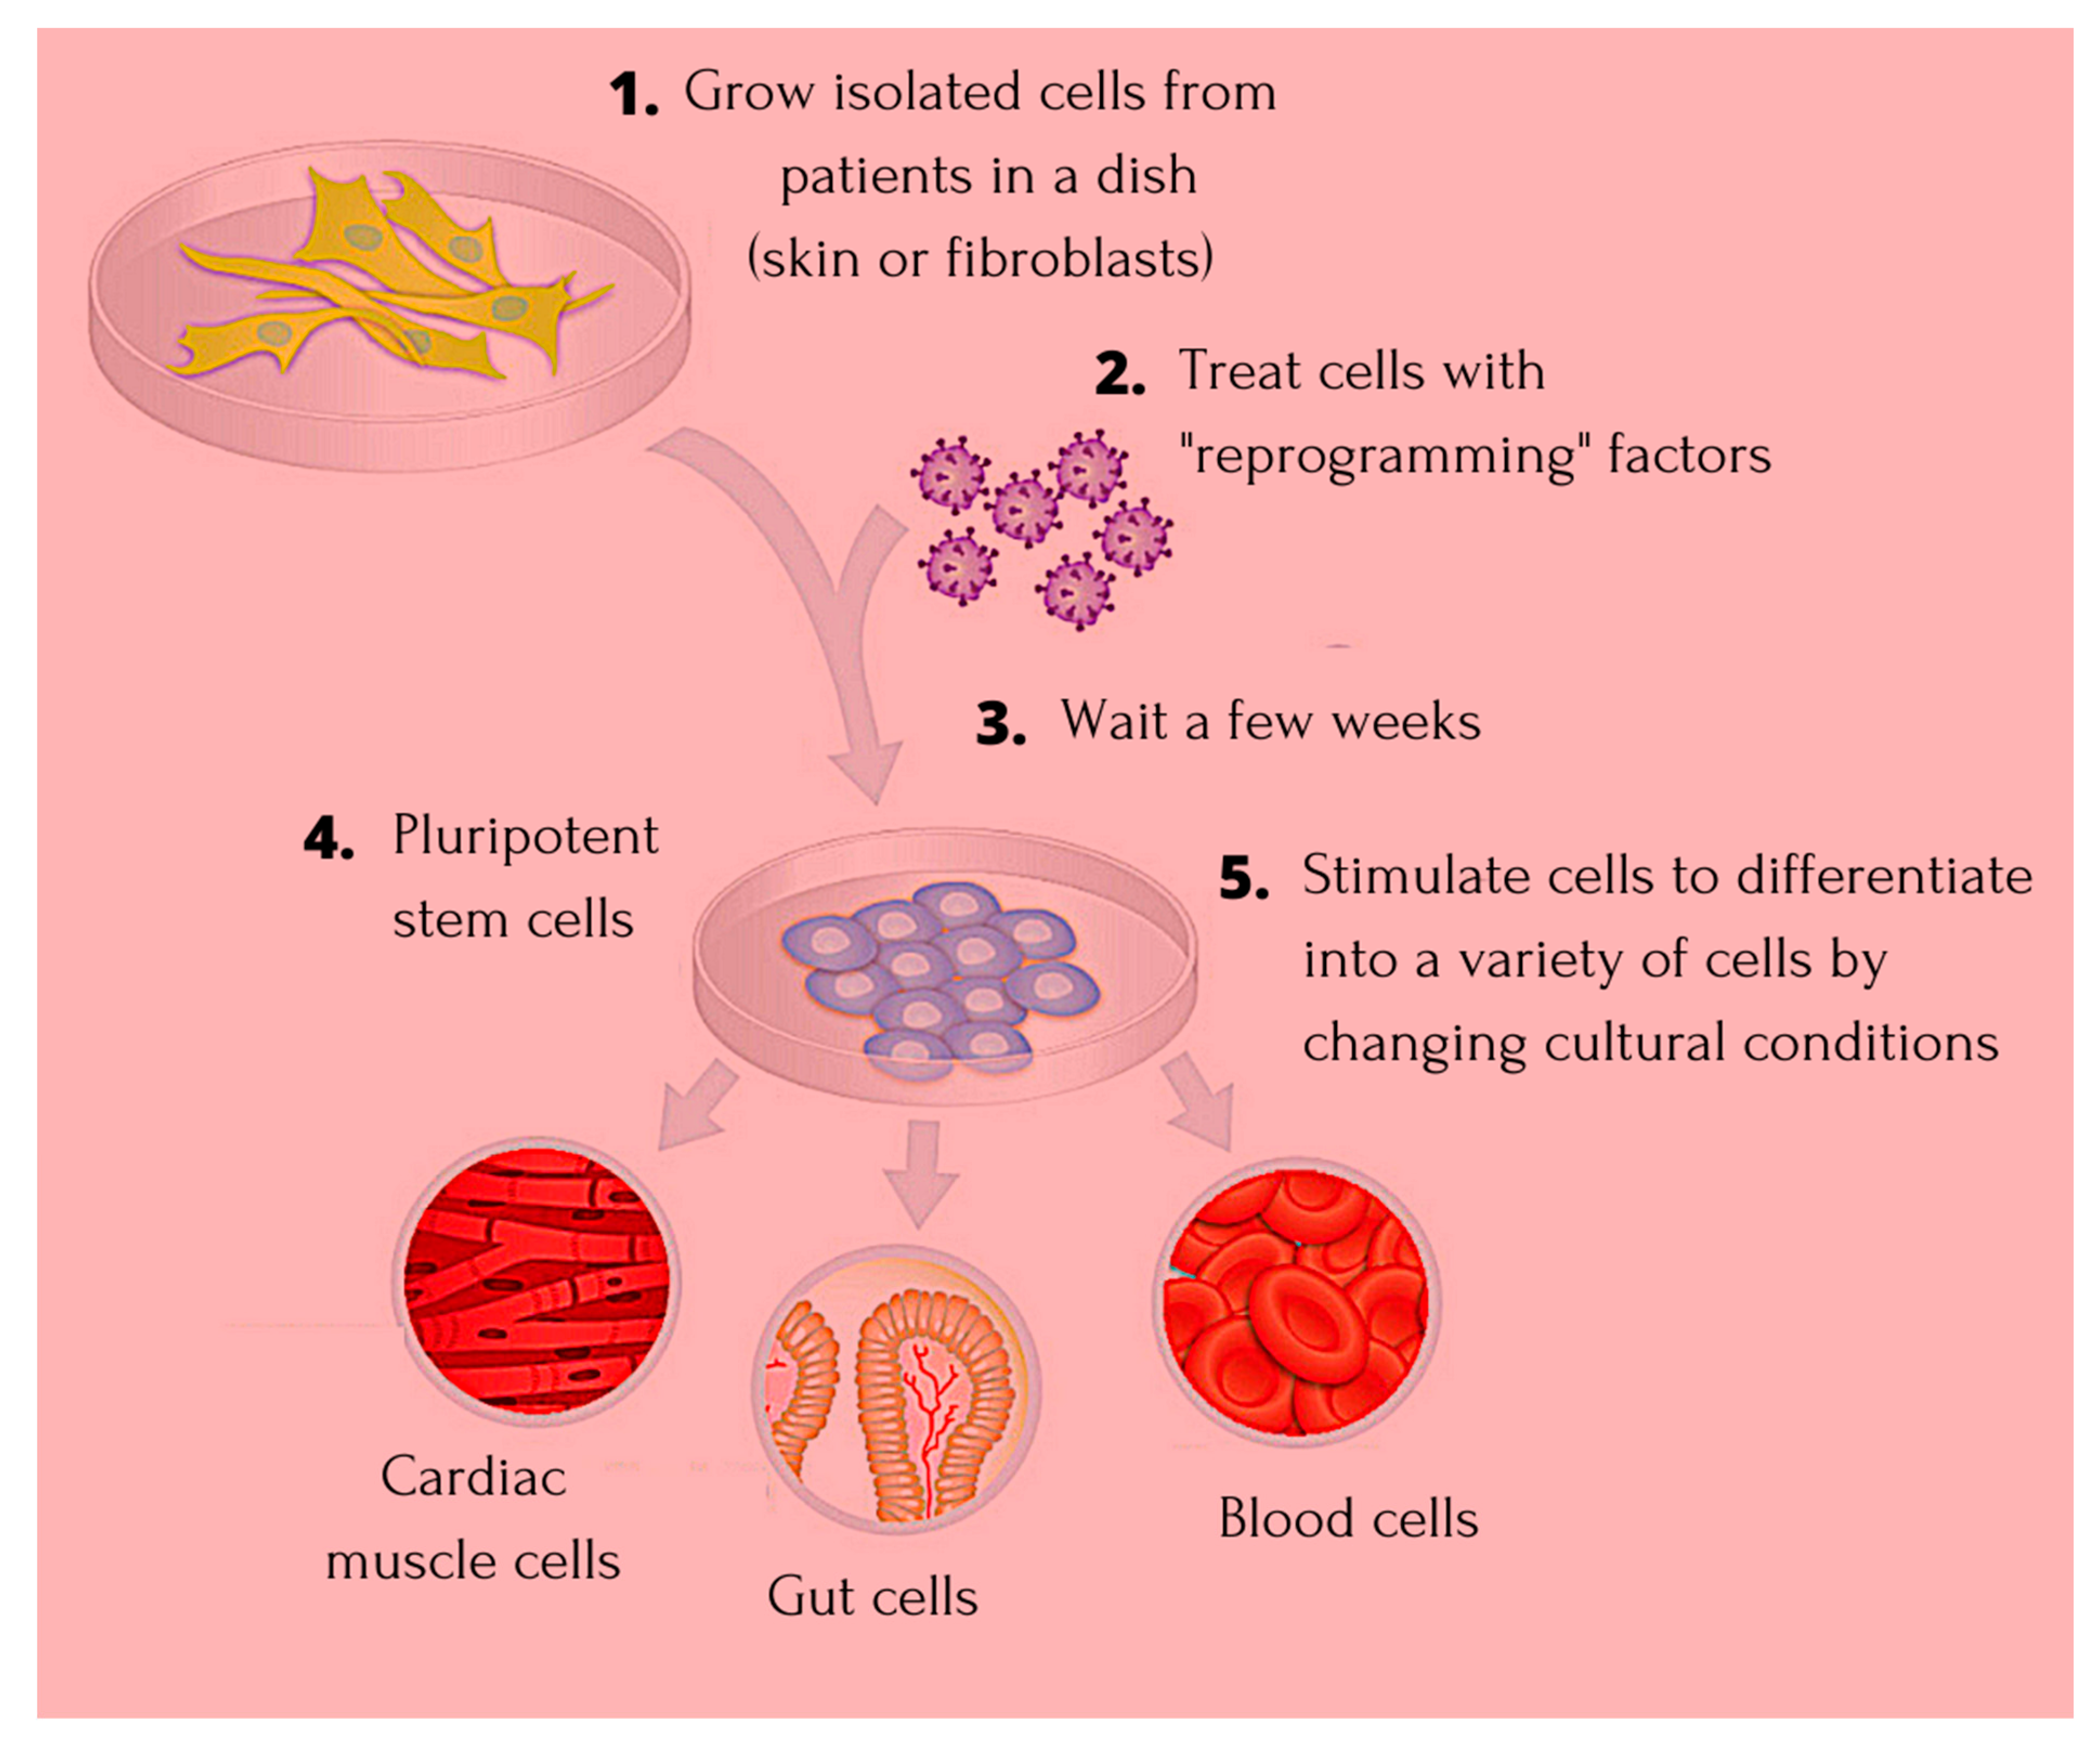 Cells | Free Full-Text | Induced Pluripotent Stem Cells (iPSCs)—Roles in Regenerative Therapies, Disease Modelling Drug Screening